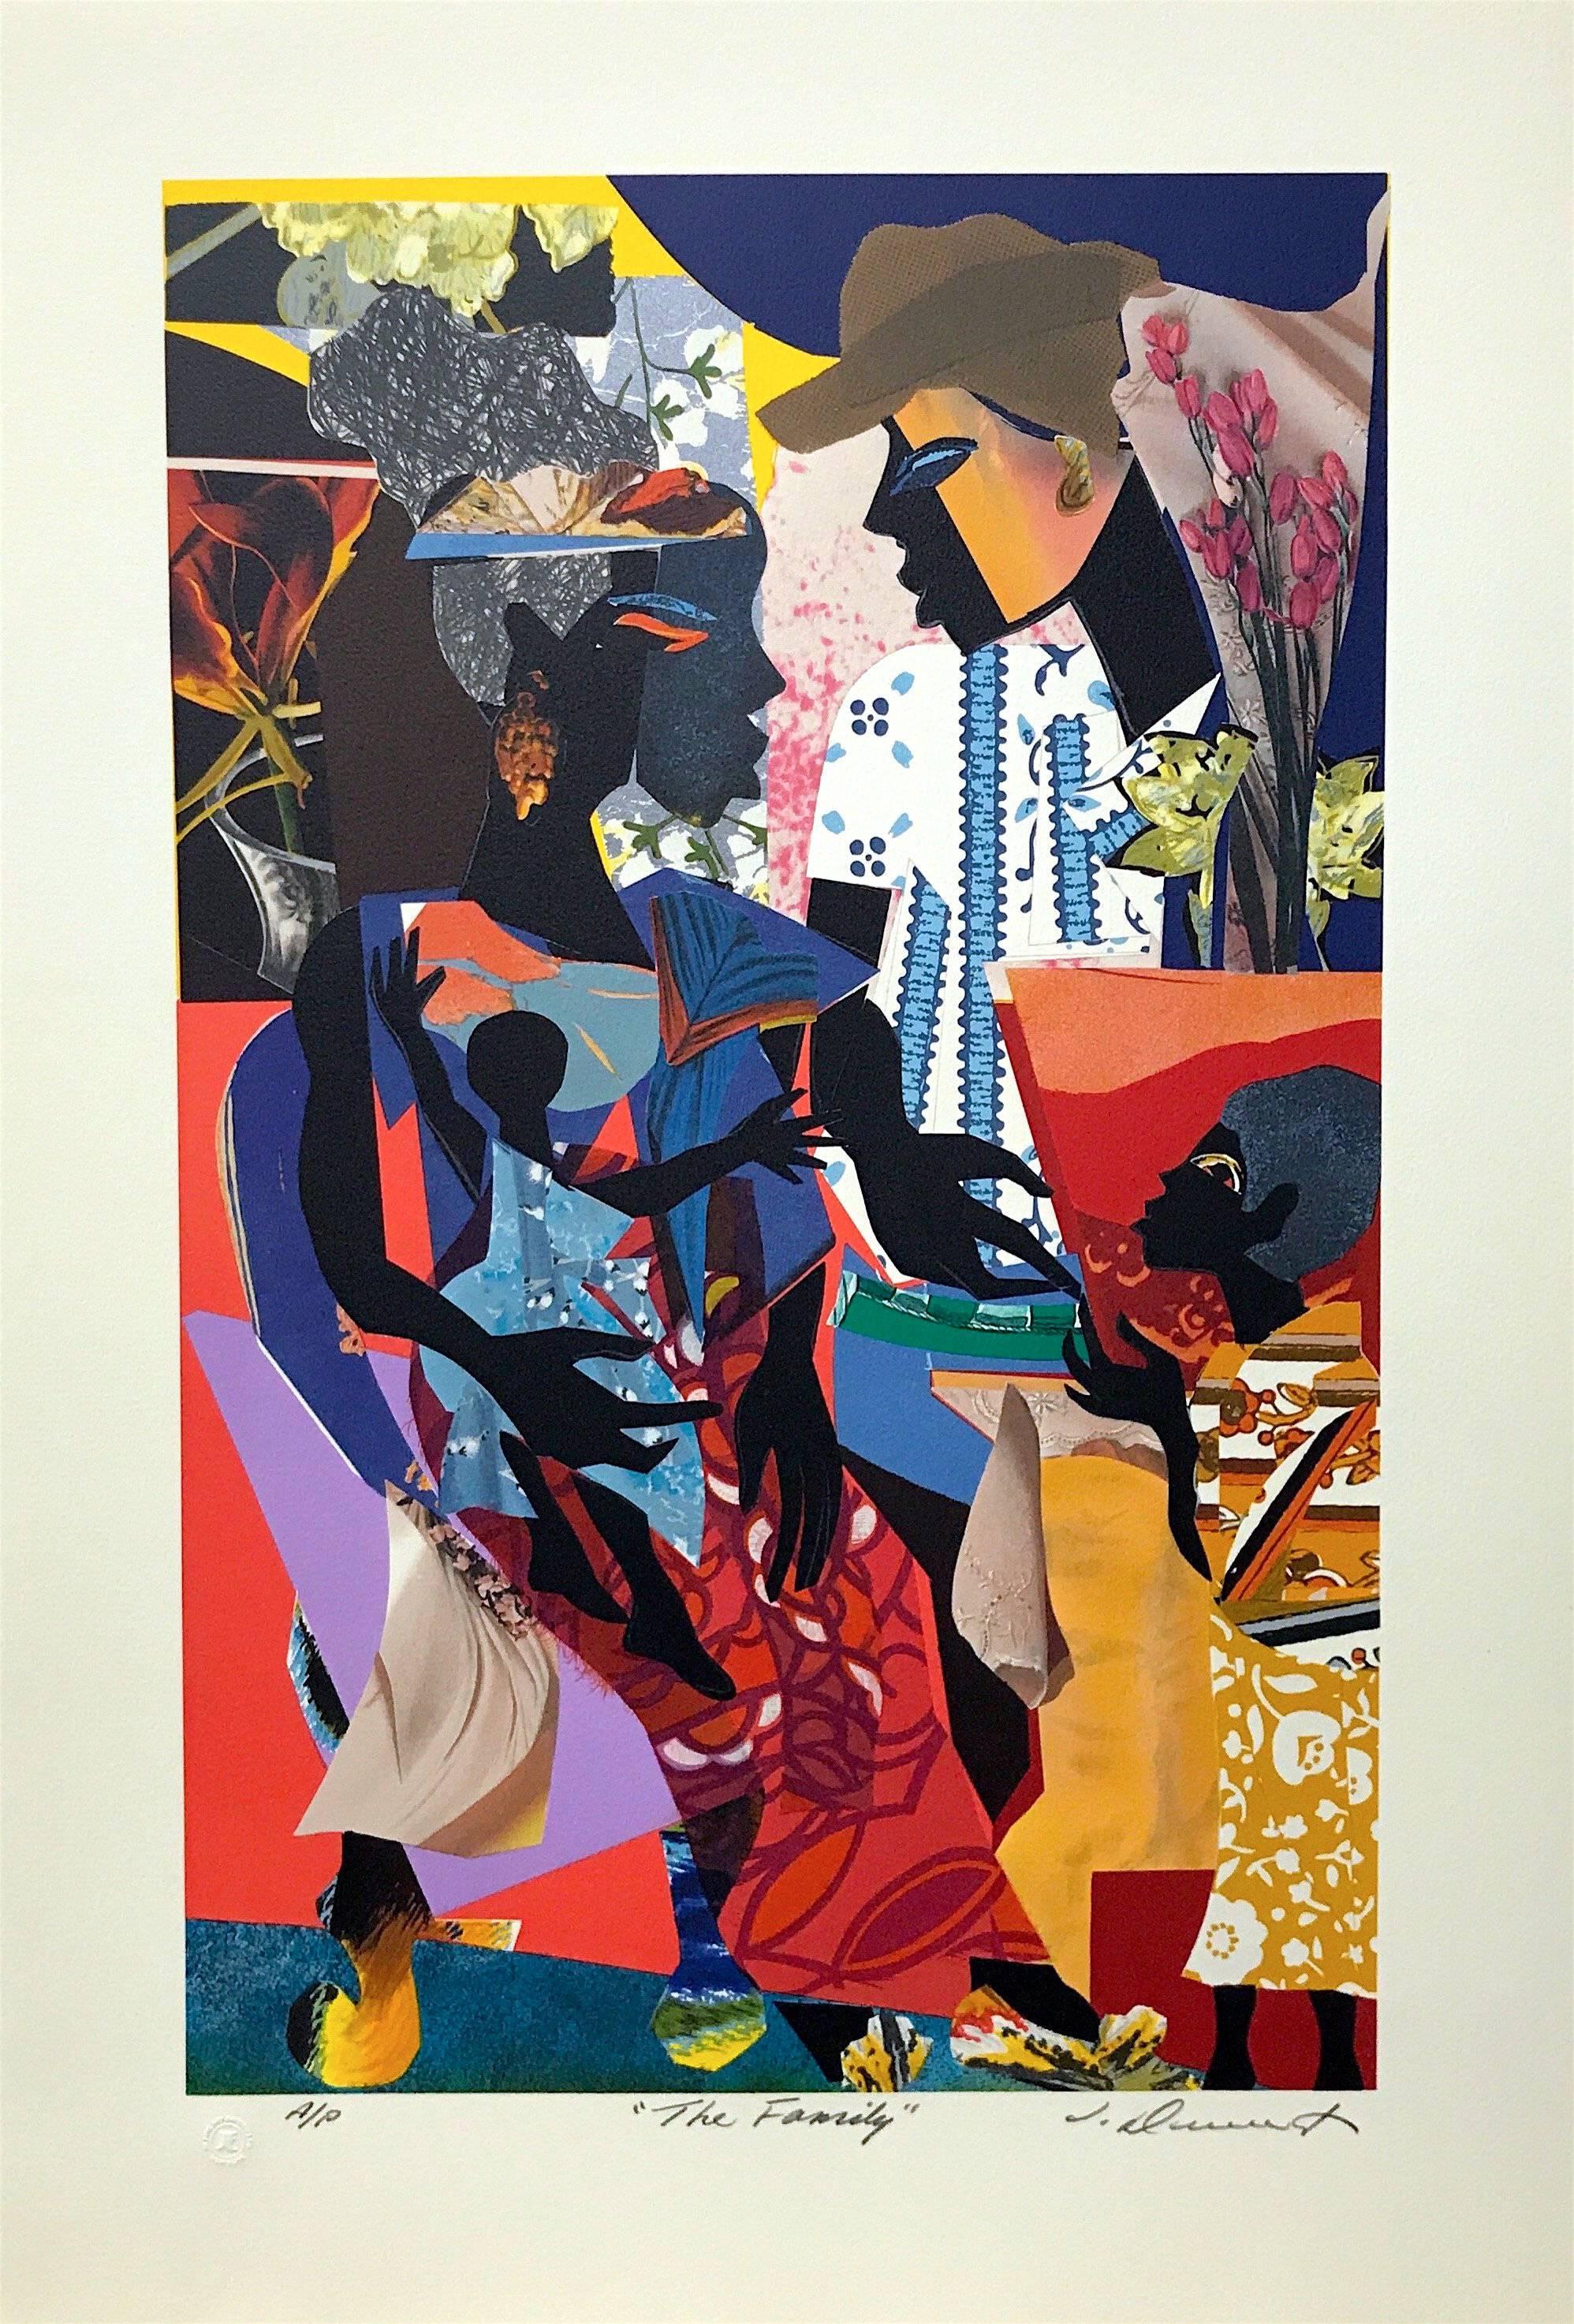 THE FAMILY Signed Lithograph, Black Family Portrait, Collage, African American  - Beige Figurative Print by James Denmark